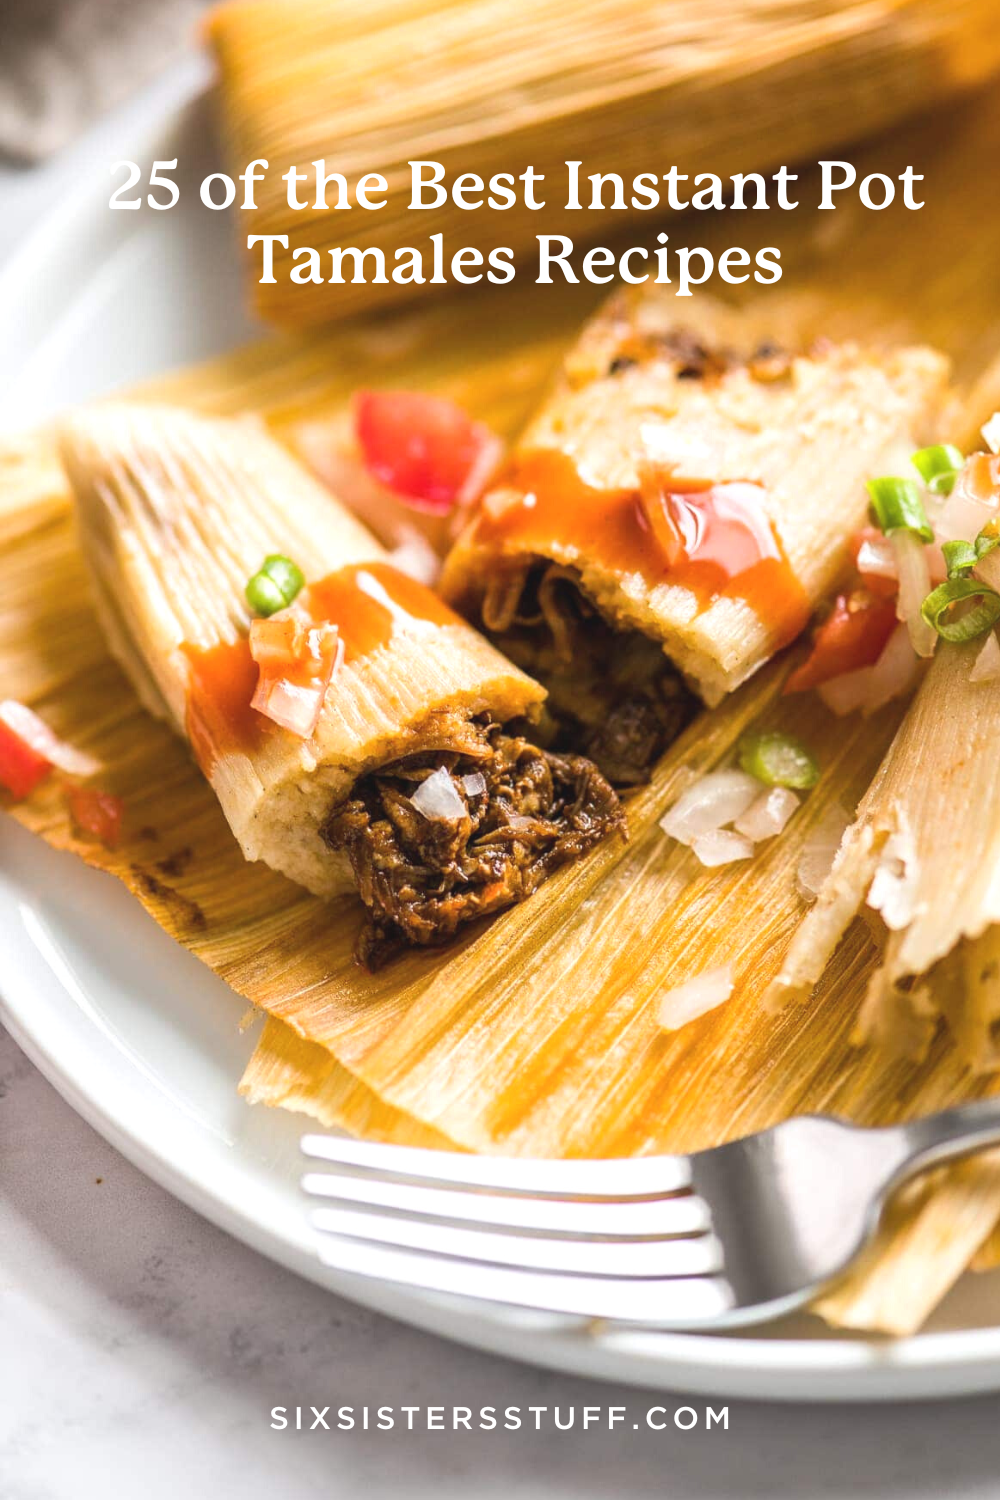 https://www.sixsistersstuff.com/wp-content/uploads/2023/02/25-of-the-Best-Instant-Pot-Tamales-Recipes.png